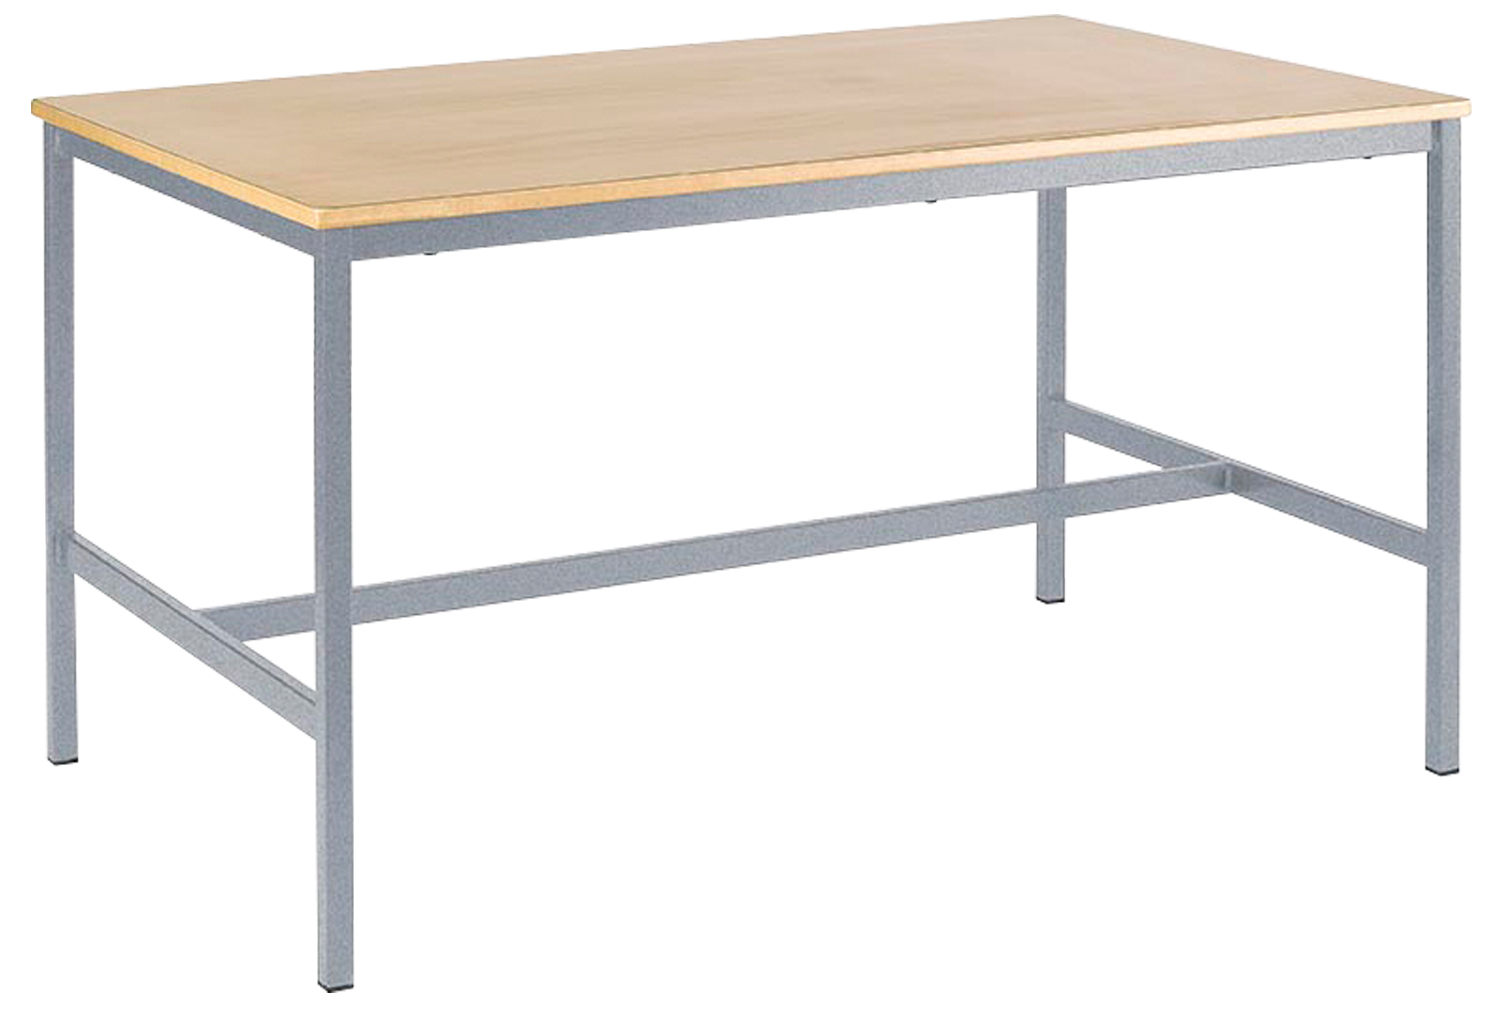 Qty 2 - Fully Welded Craft Tables, 120wx60dx100h (cm), Speckled Grey Frame, Beech